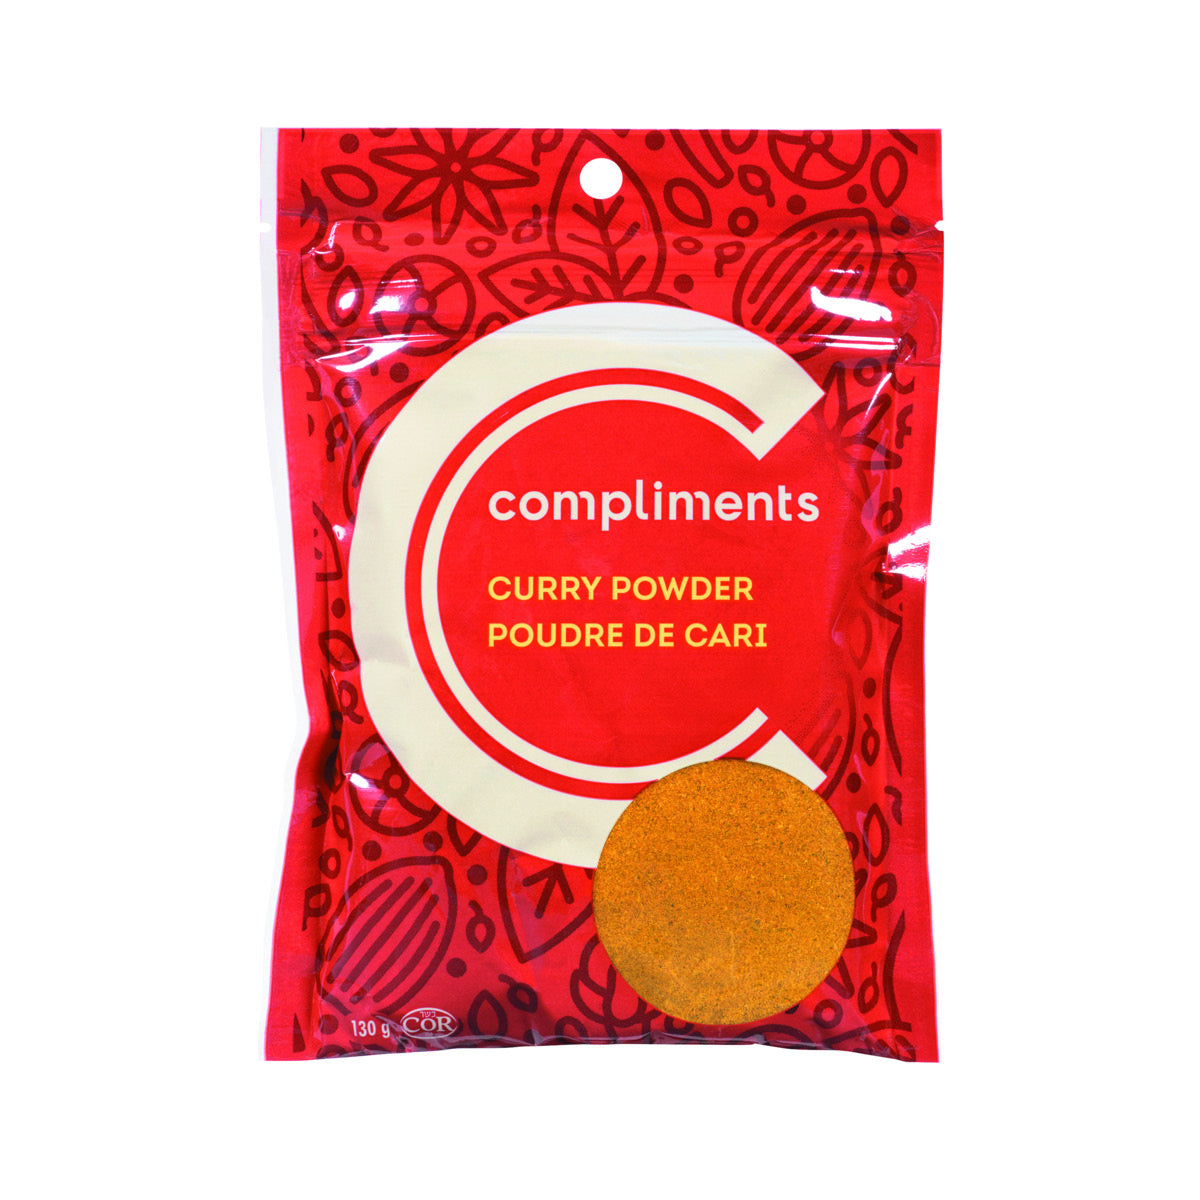 Compliments Curry Powder, 130g